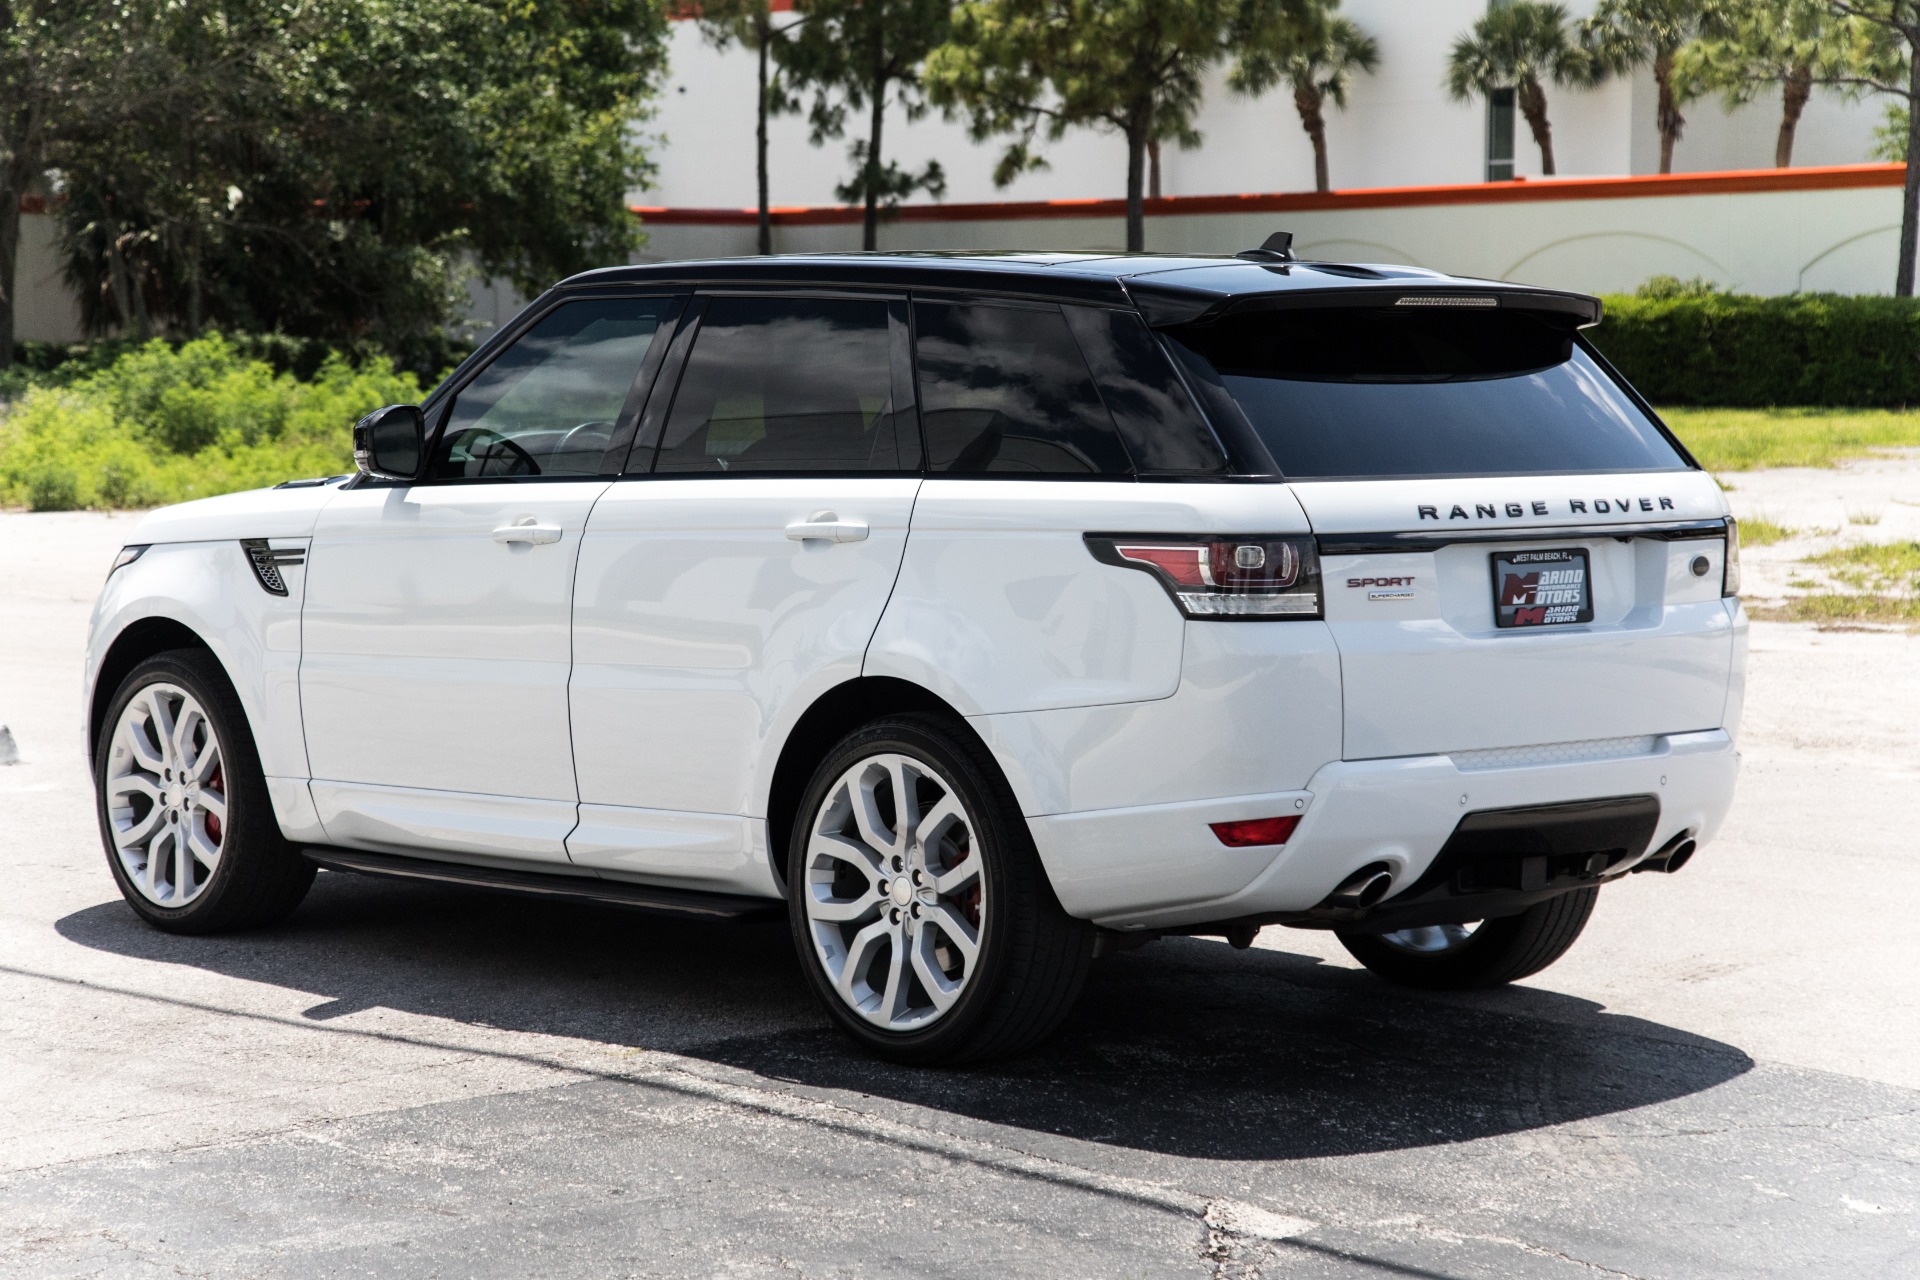 Used 2015 Land Rover Rover Sport Supercharged For Sale ($41,900) | Motors Stock #516938